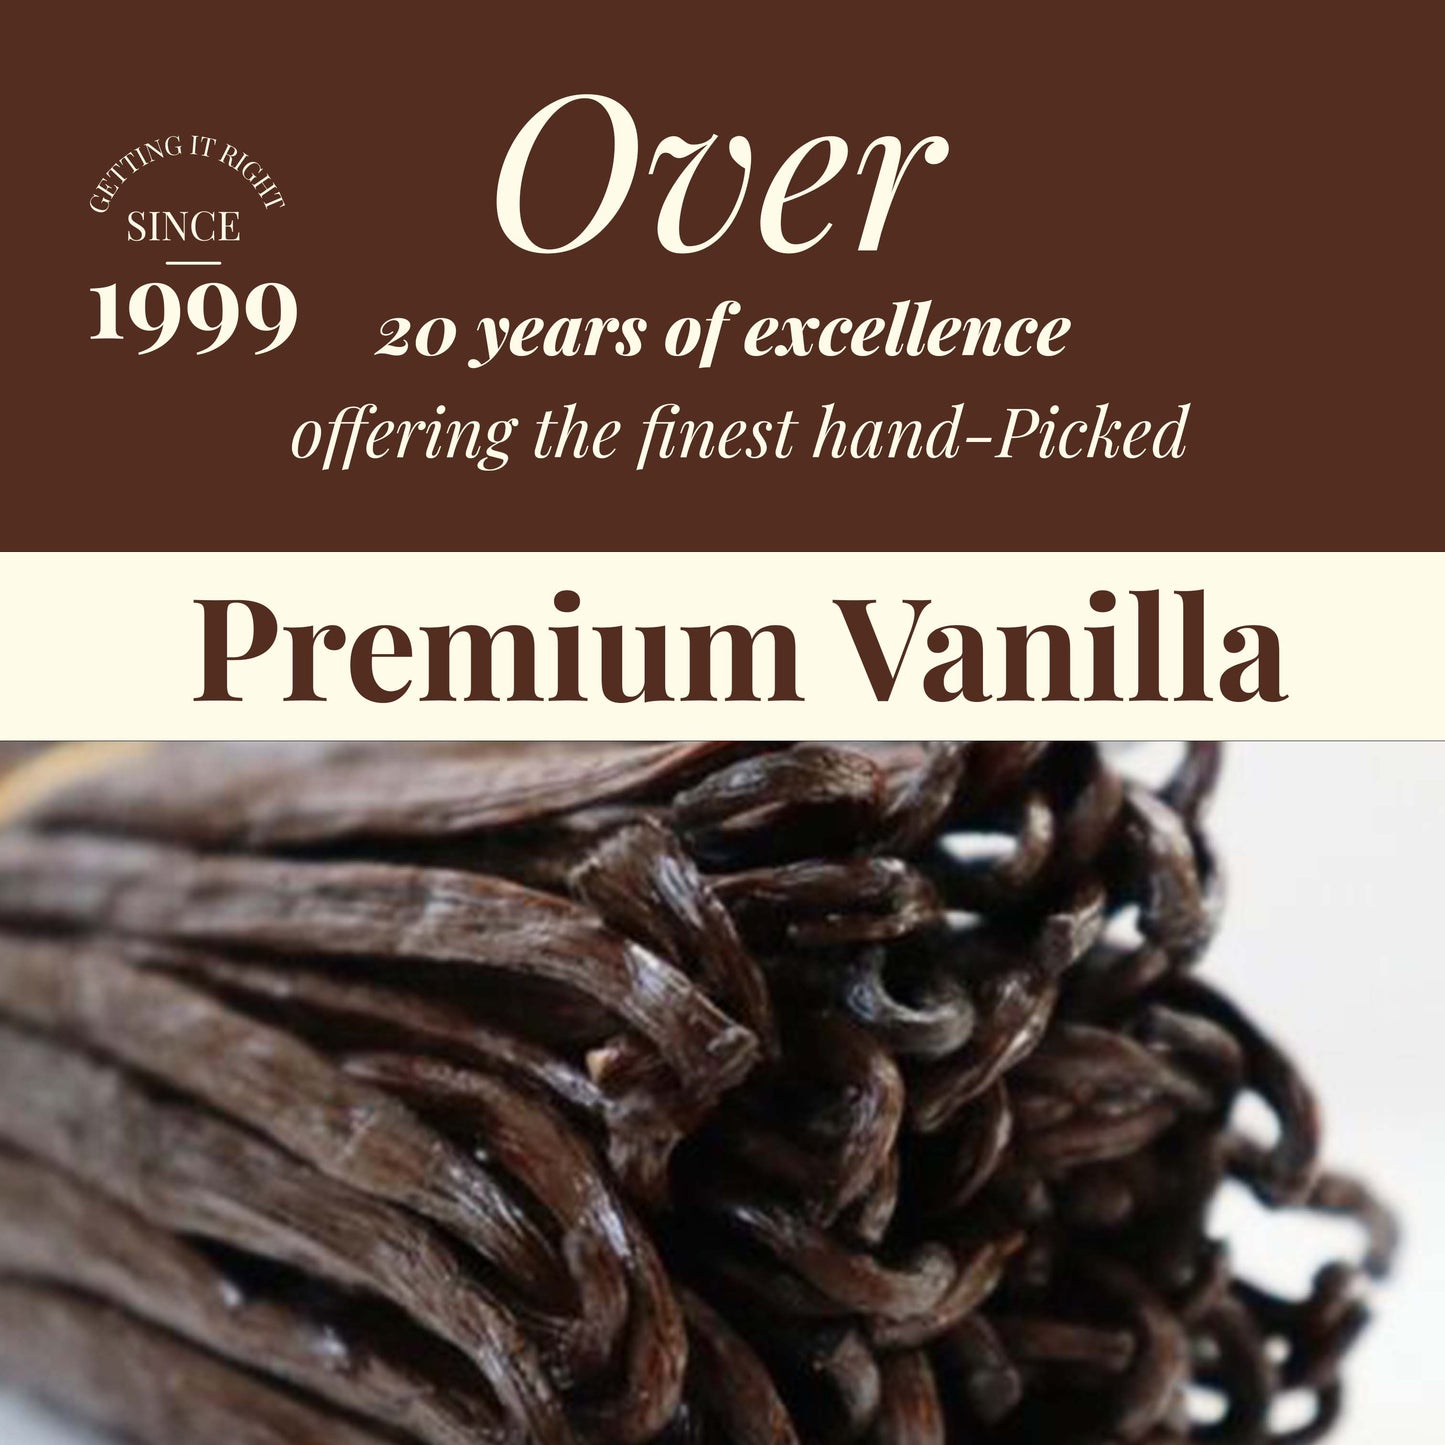 NY vanilla Over 20 Years of excellence offering the finest hand-picked Premium Vanilla 